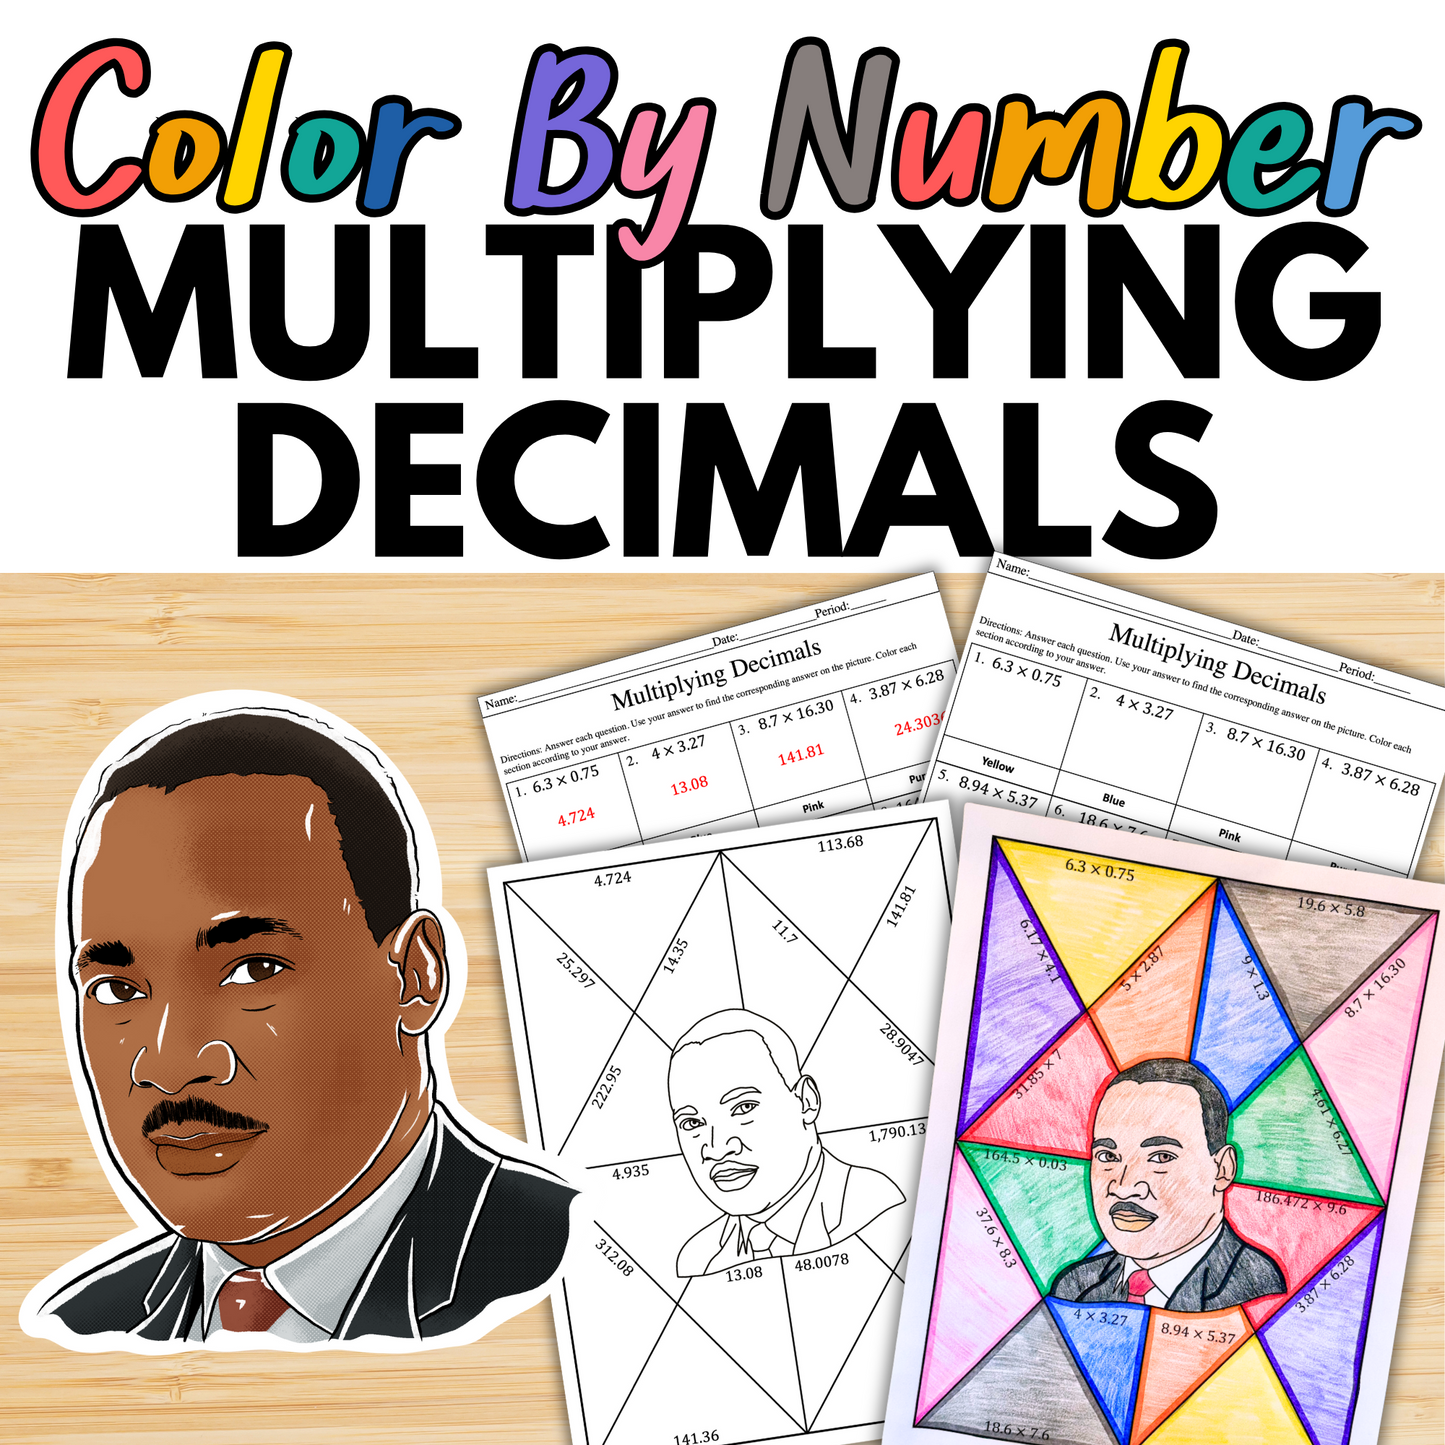 Multiplying Decimals Color by Number